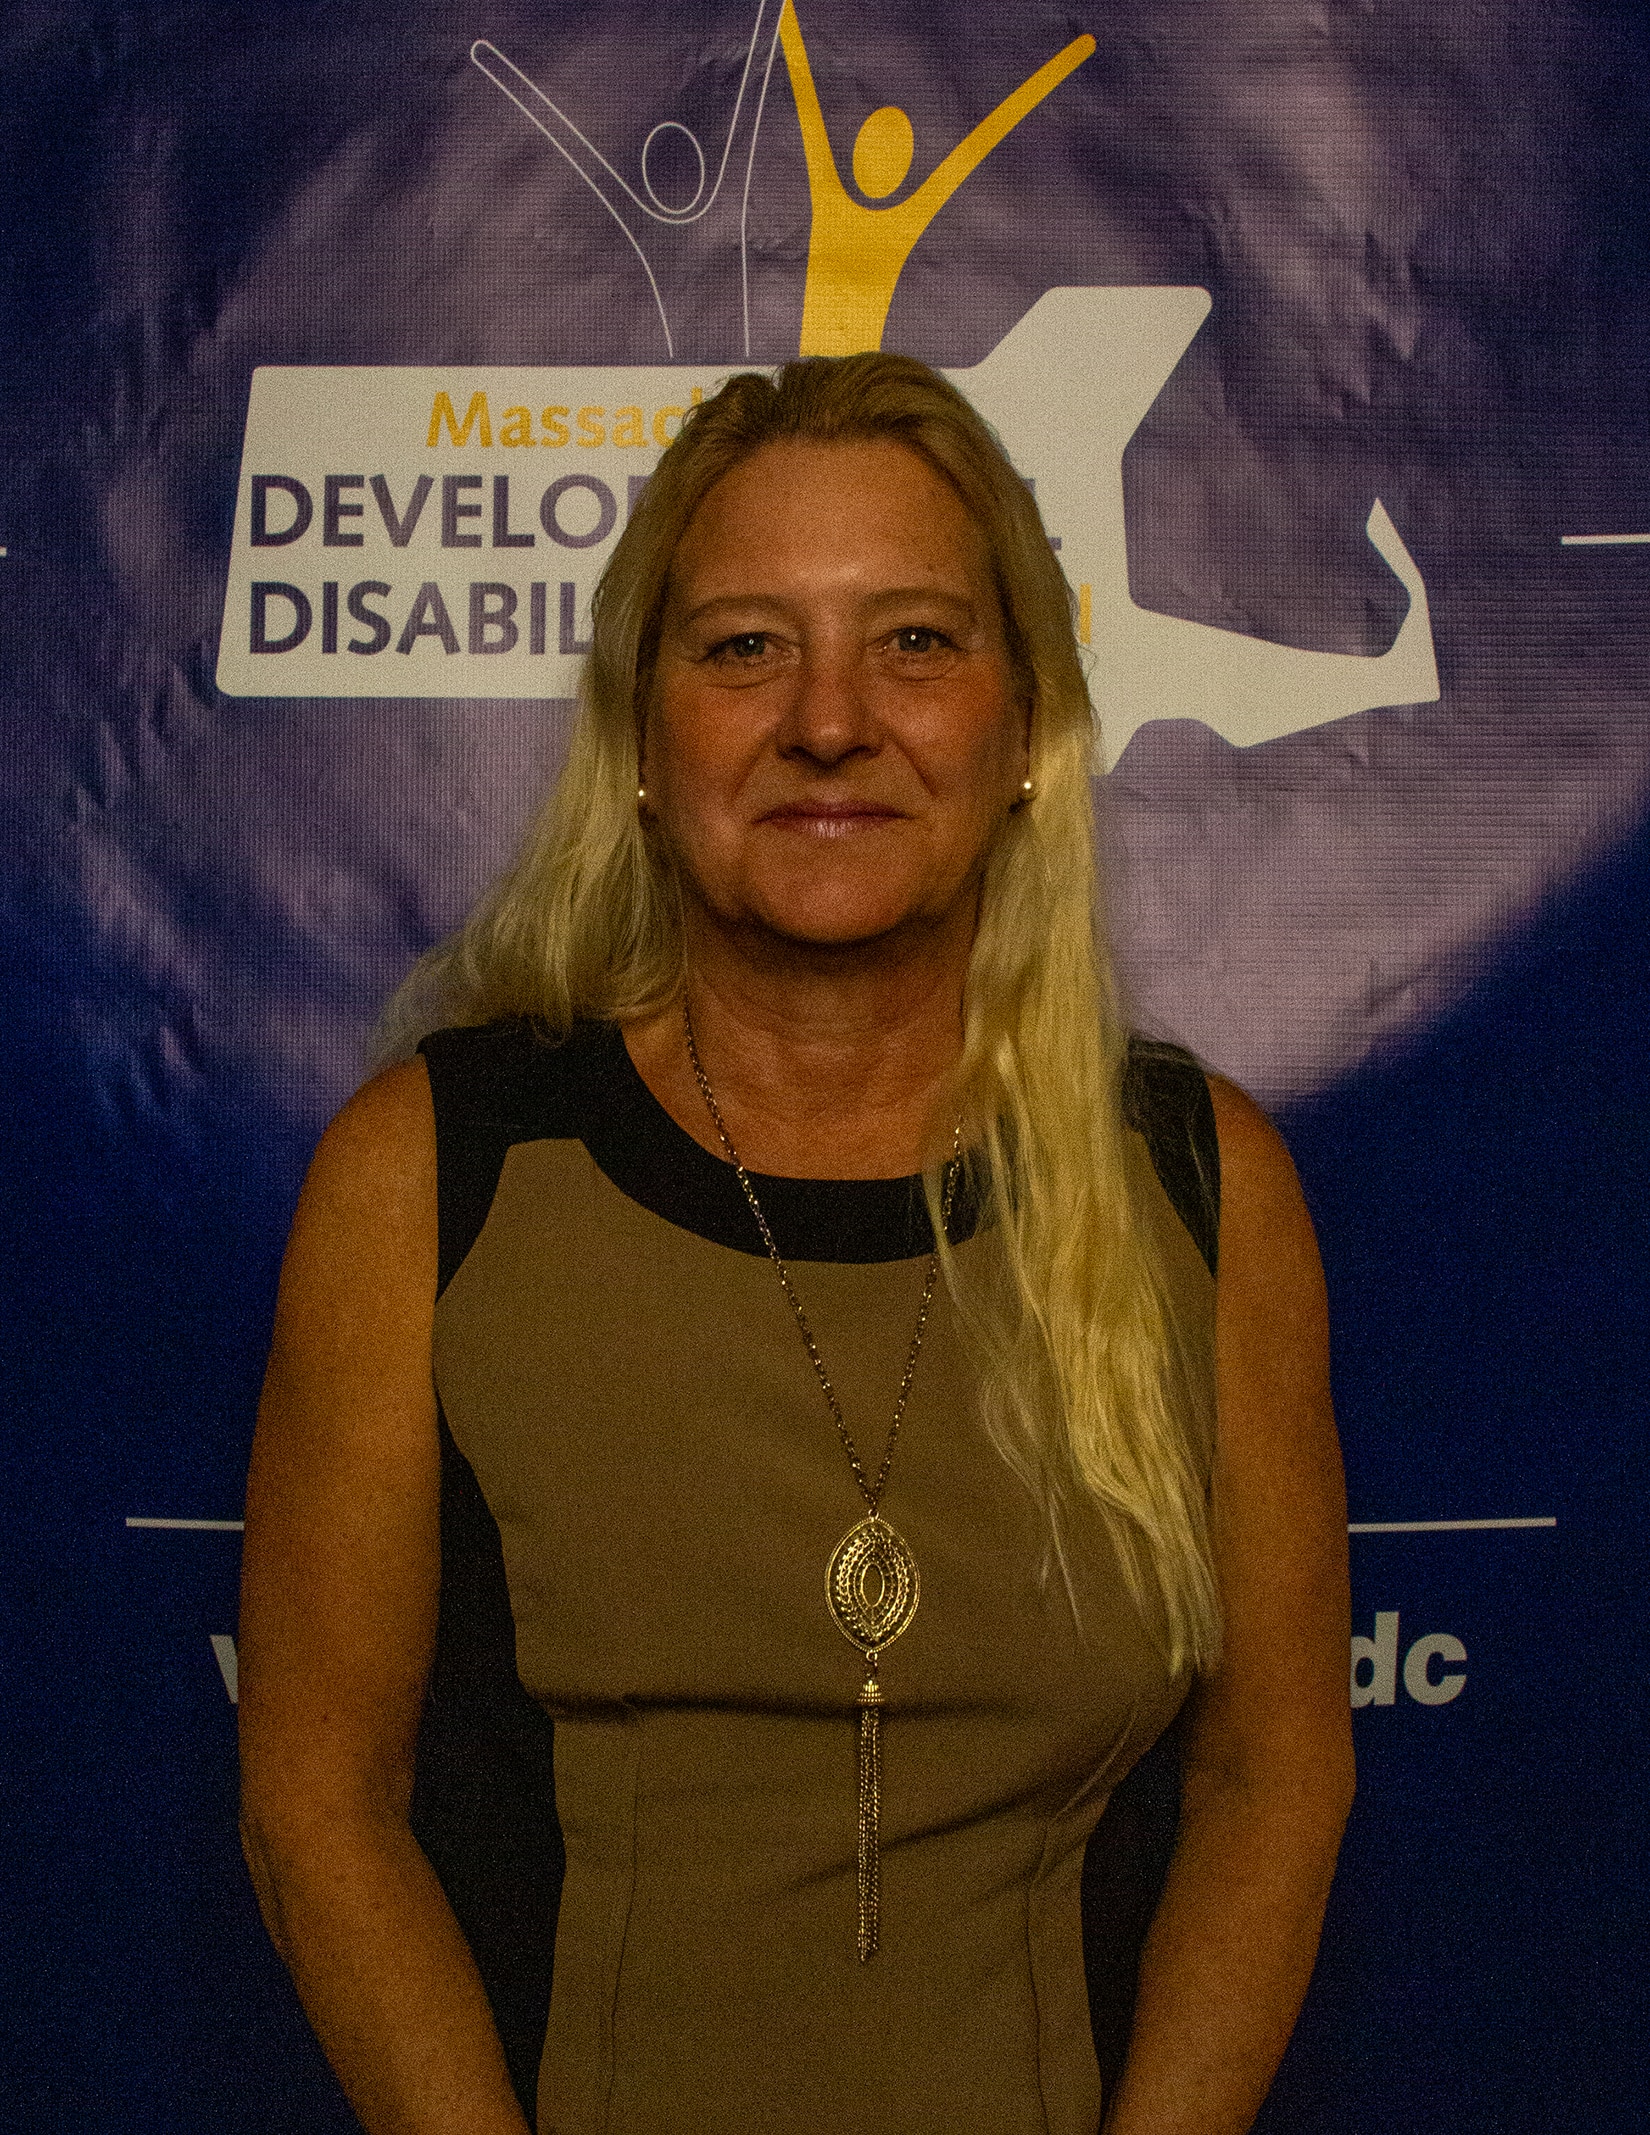 A white woman with long blonde hair wearing a beige and black dress stands in front of a blue banner with the MDDC logo printed on it.